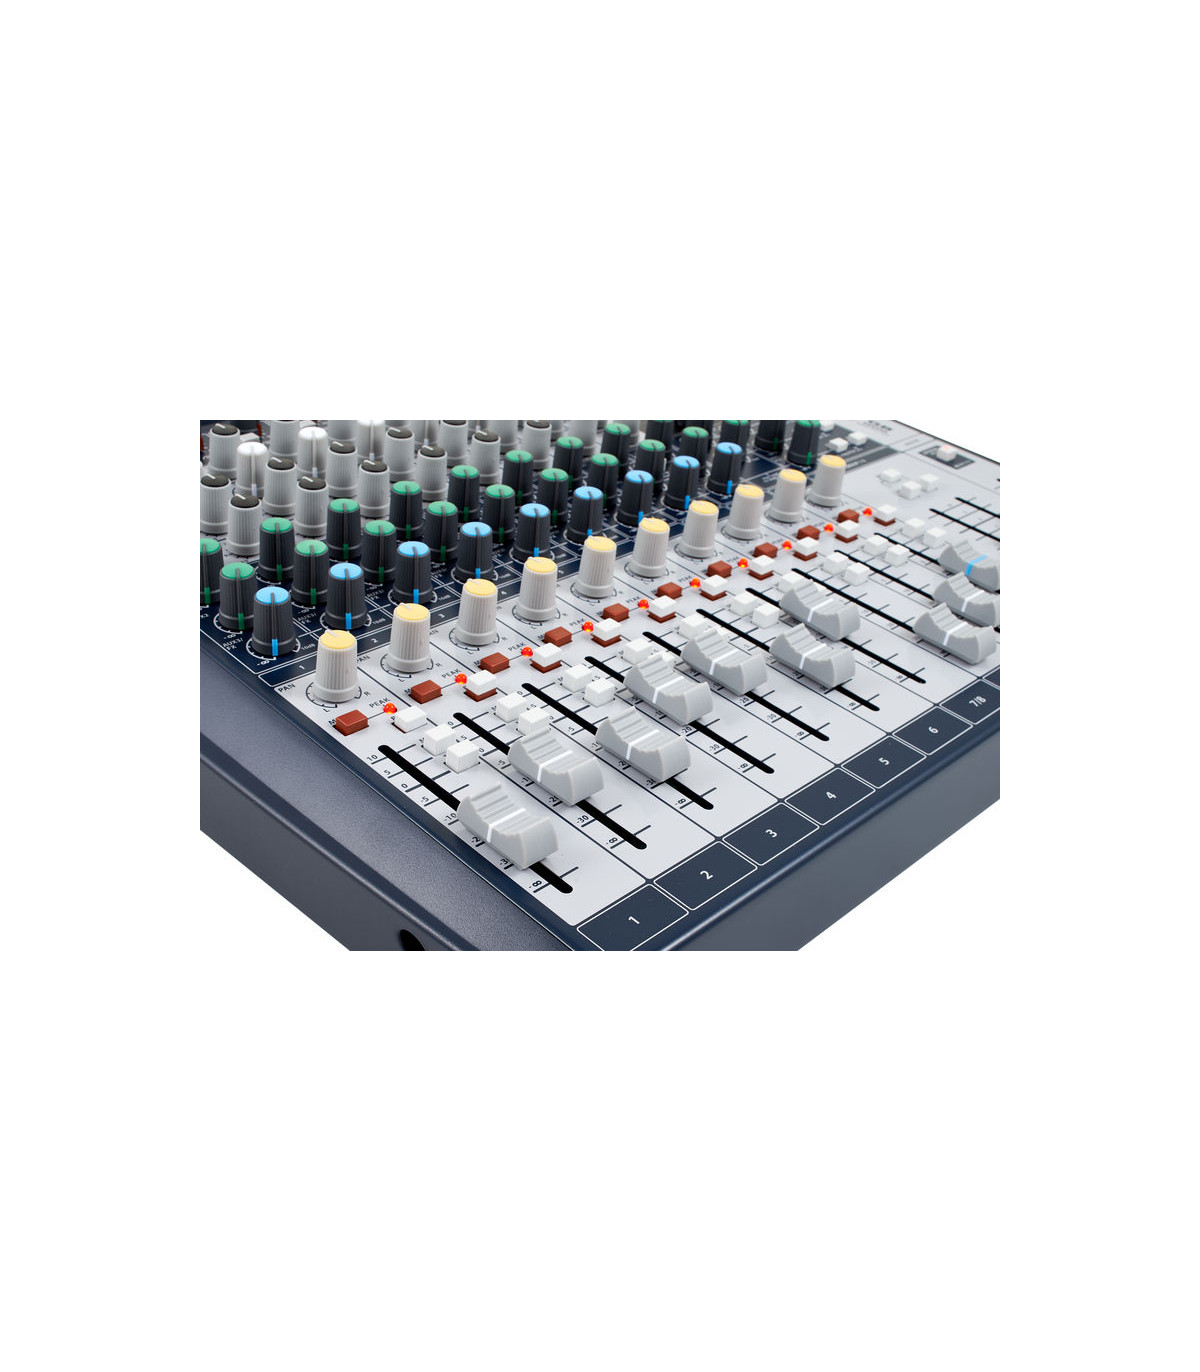 Soundcraft Signature 12 High-Performance 12-Input Small Format 12-Channel Mixer with Onboard Effects Bundle with 6 x Senor Microphone Cable and Zorro Sounds Cloth 